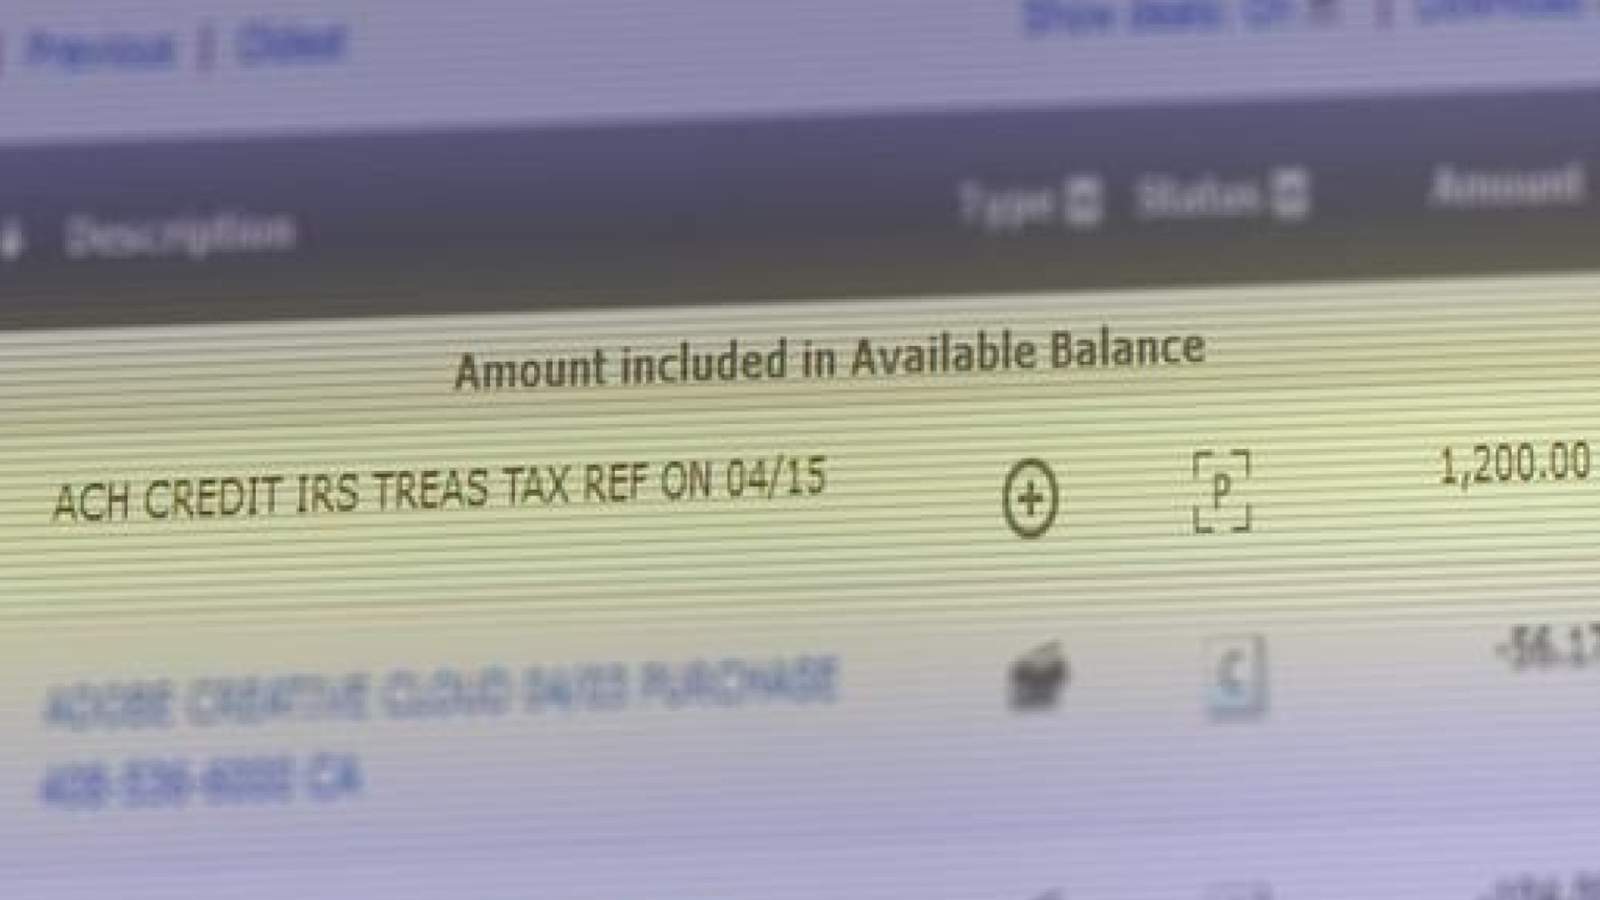 Your stimulus check could be delayed if you used tax preparation company, reports say